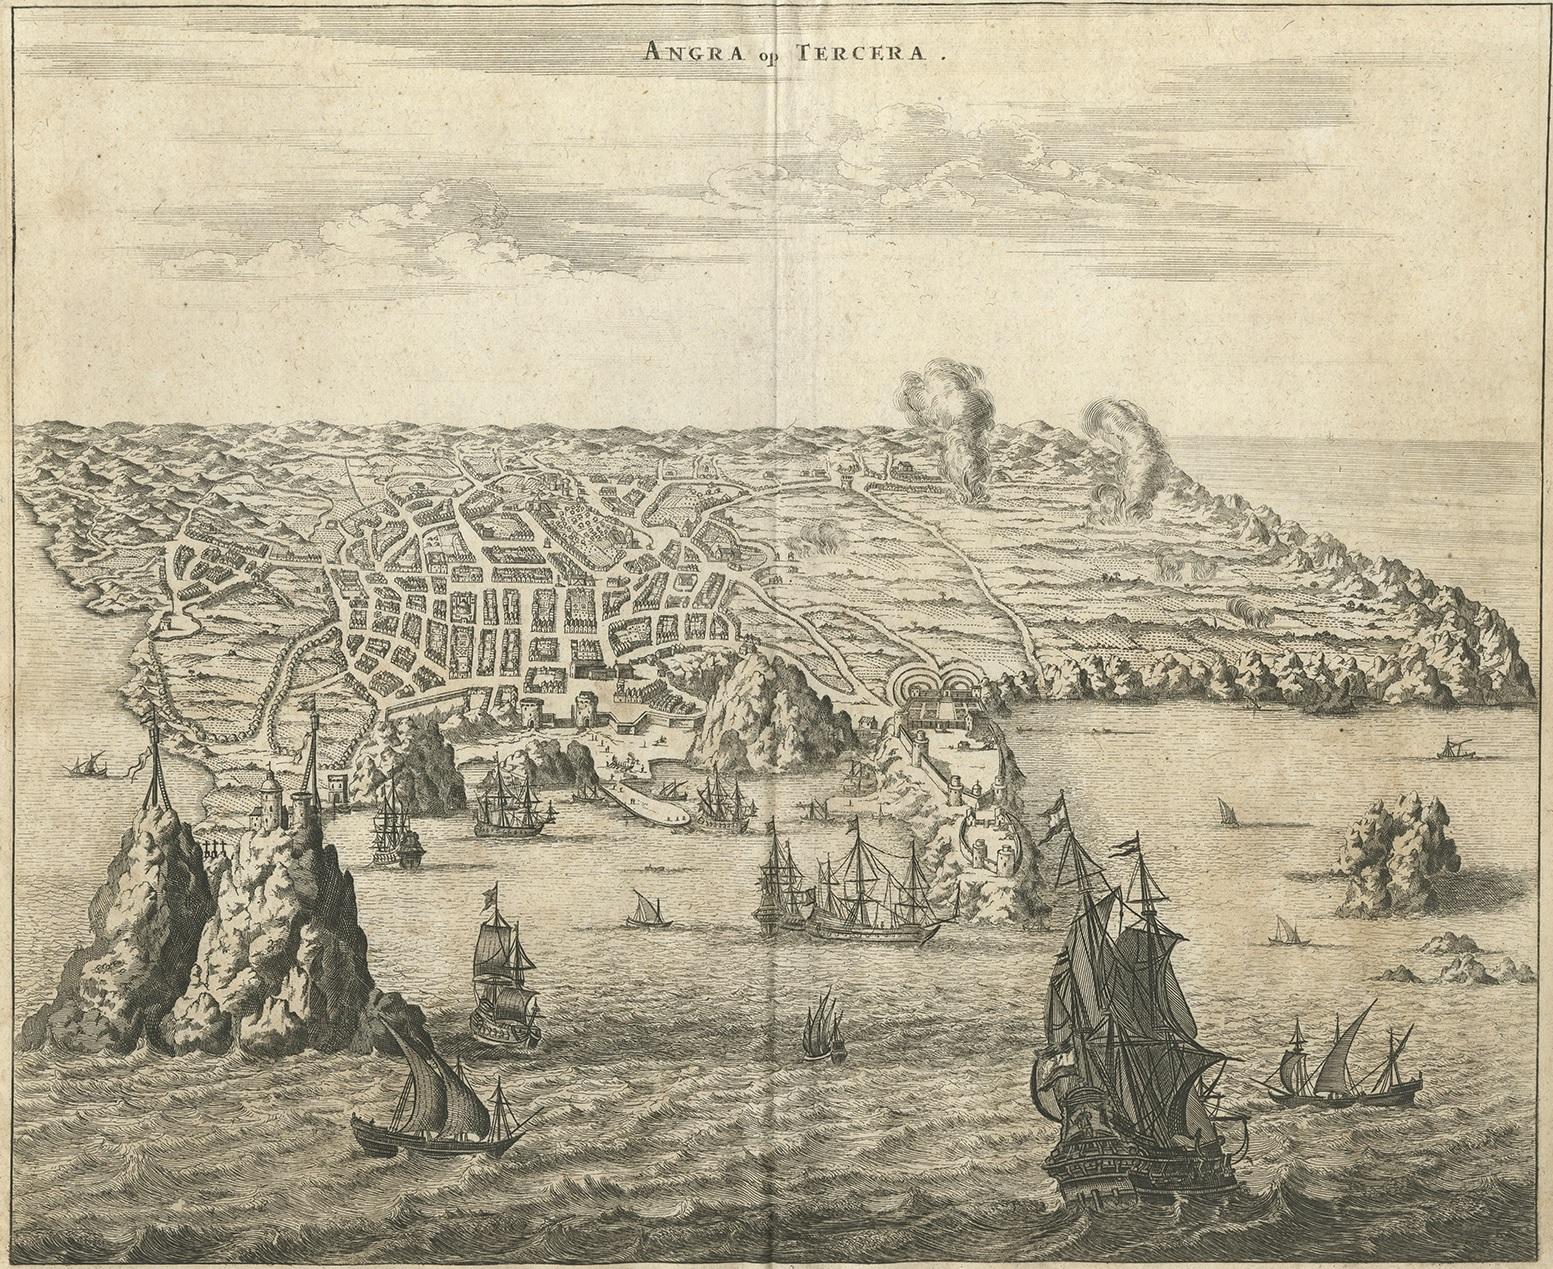 Antique print titled 'Angra op Tercera'. Antique print of Angra, Azores, in Portugal, during the mid-17th century. Shows roadways buildings, fortifications and geographical features; with numerous ships shown sailing off of the coast in the